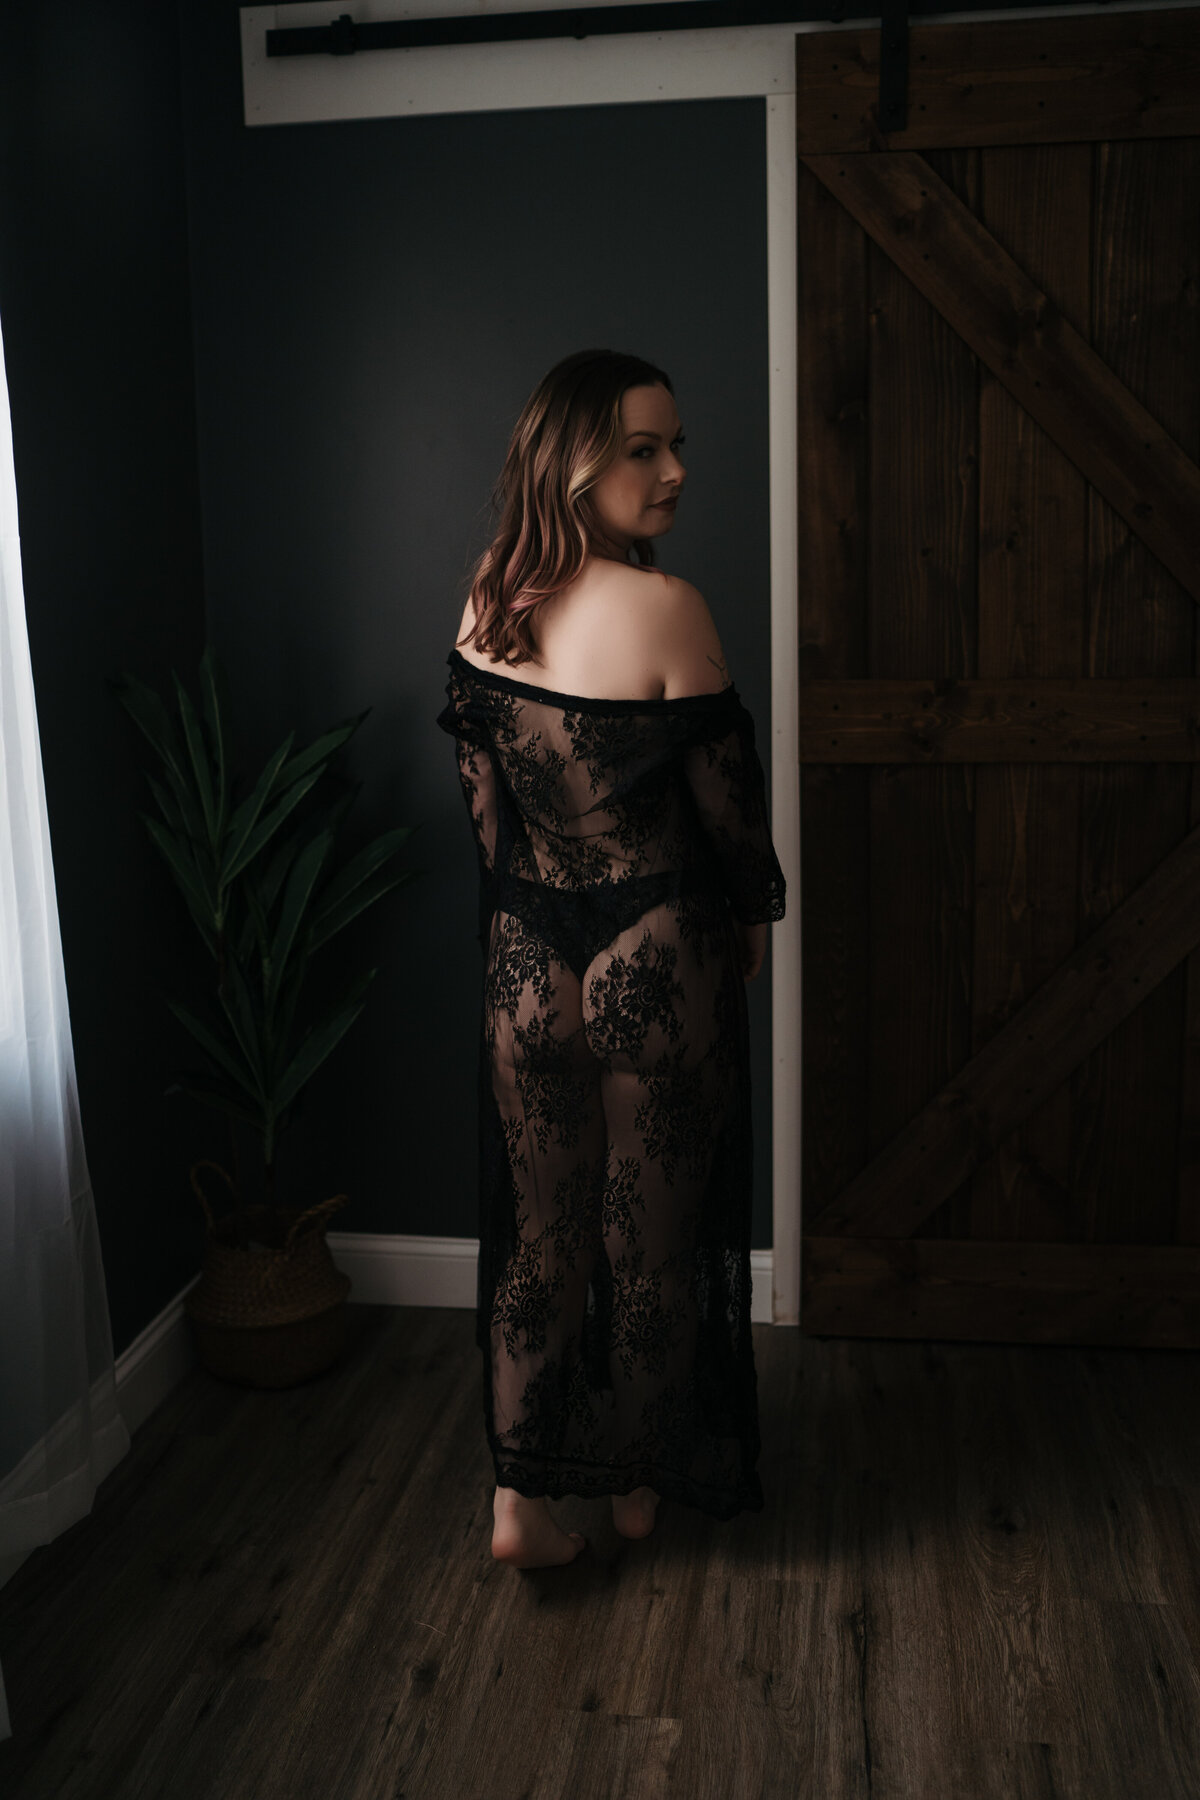 A woman in a black lace cover-up and black thong walks through a studio by a window looking over her shoulder